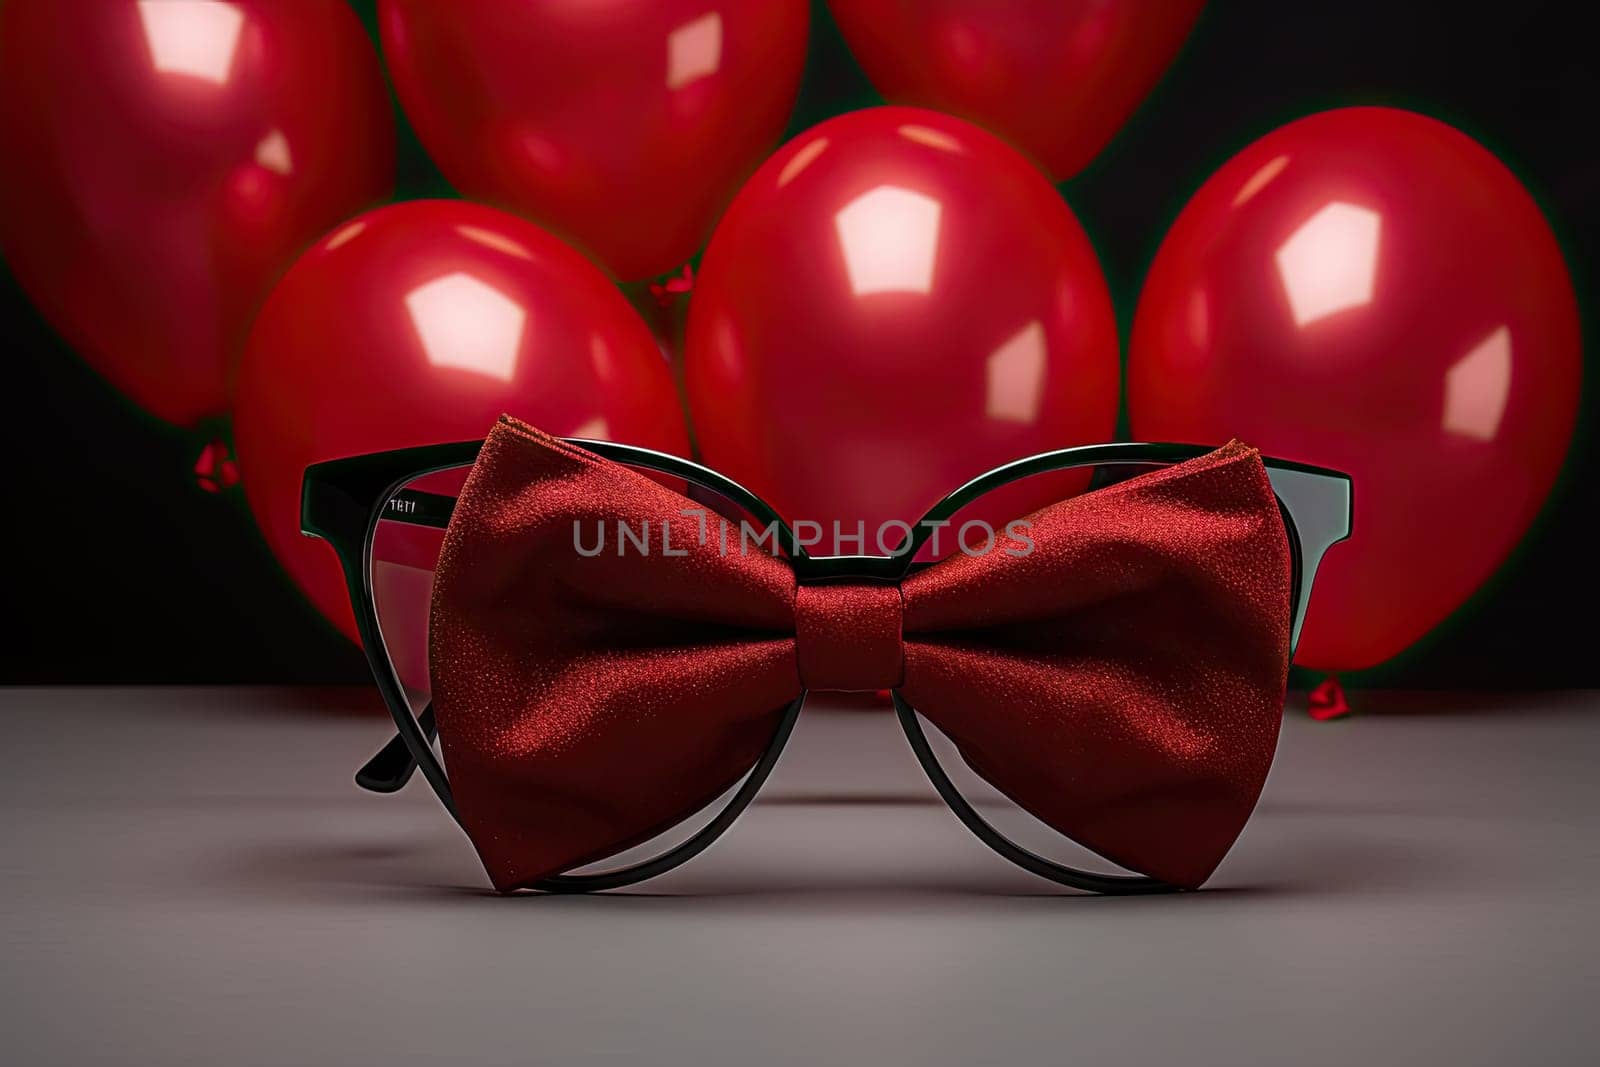 A Festive Celebration with Vibrant Red Balloons and a Stylish Red Bow Tie Created With Generative AI Technology